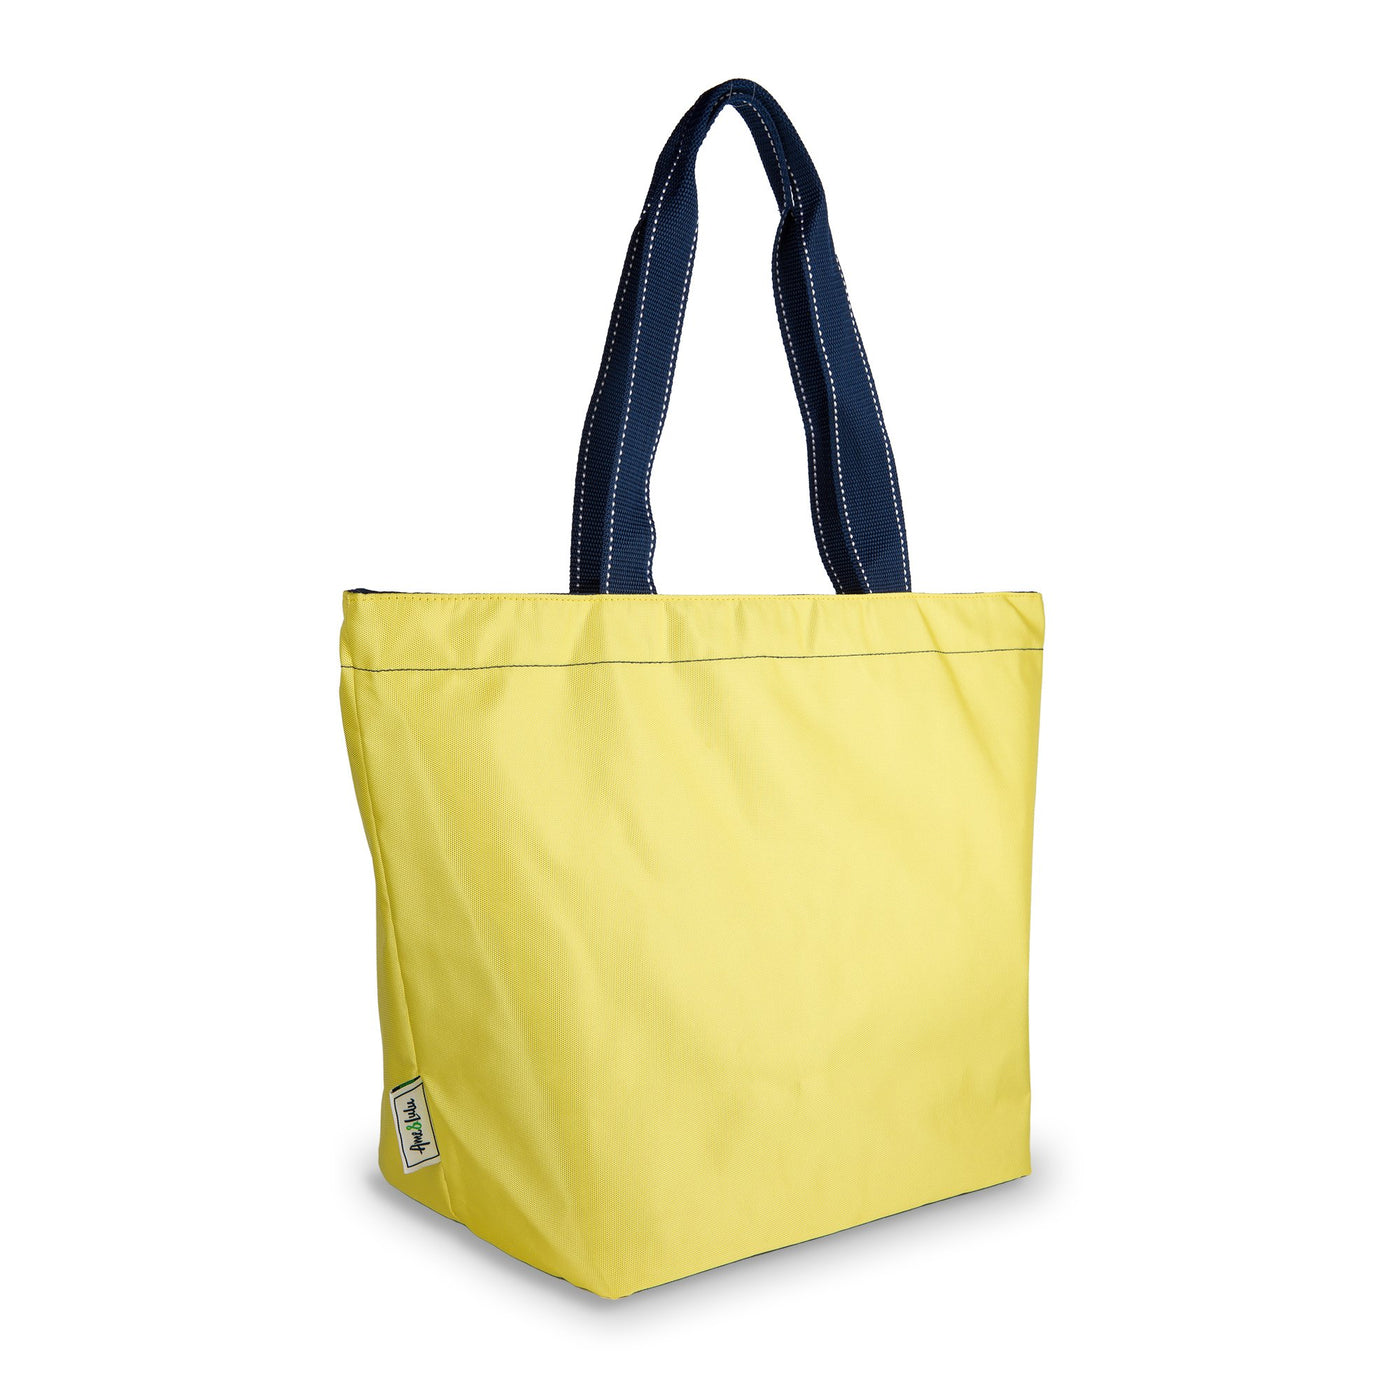 side view of yellow nylon tote bag with navy straps